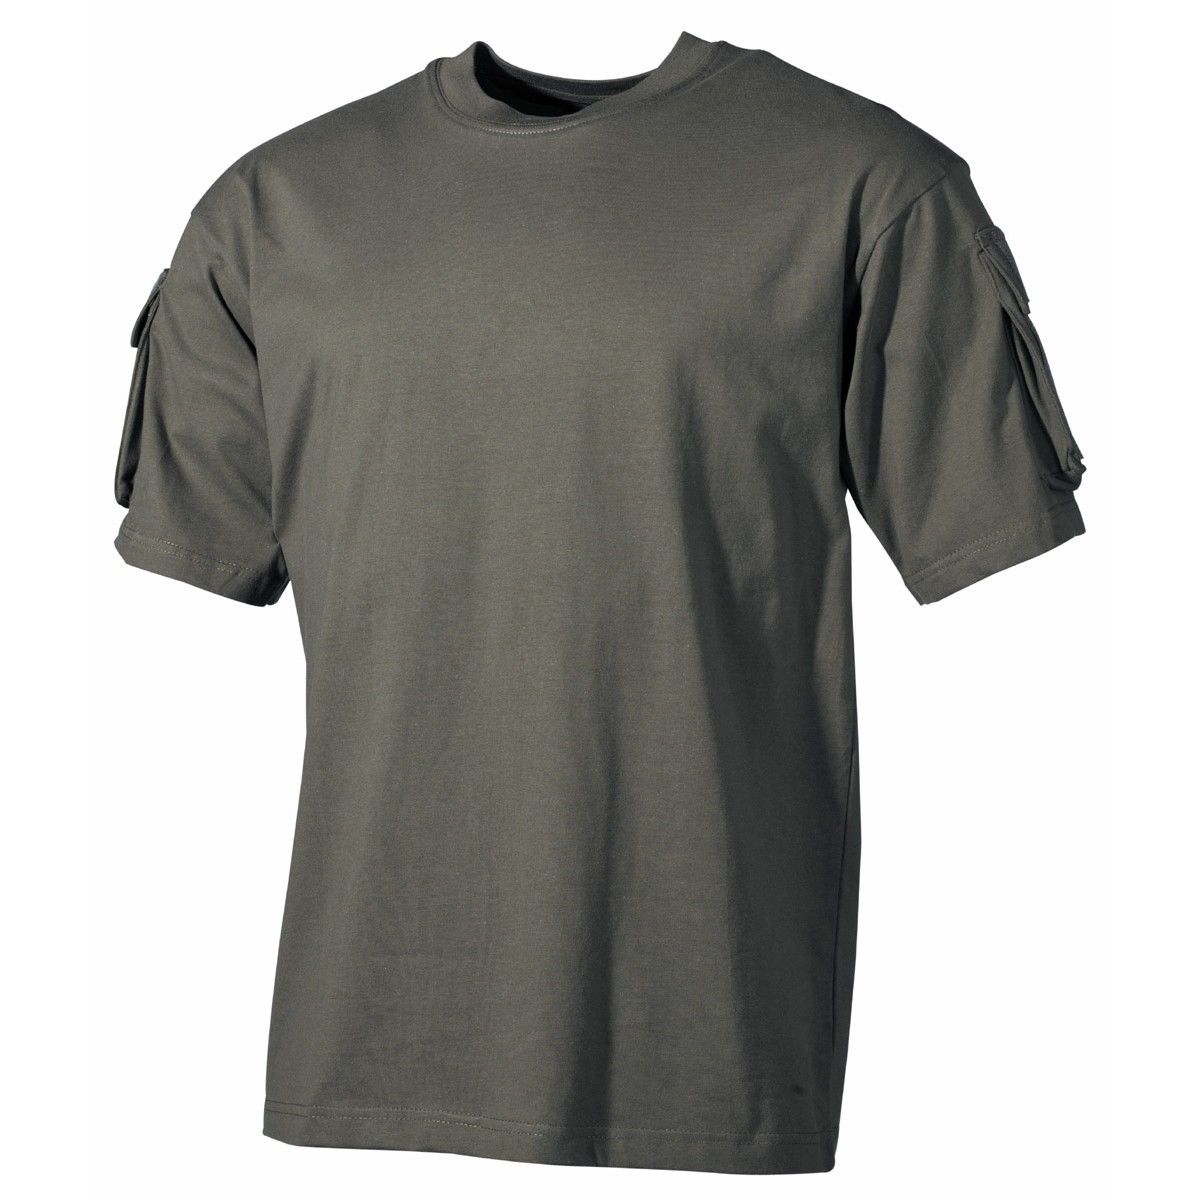 Tactical Military Army Special Ops Combat T-Shirt - OD Green - Short Sleeve